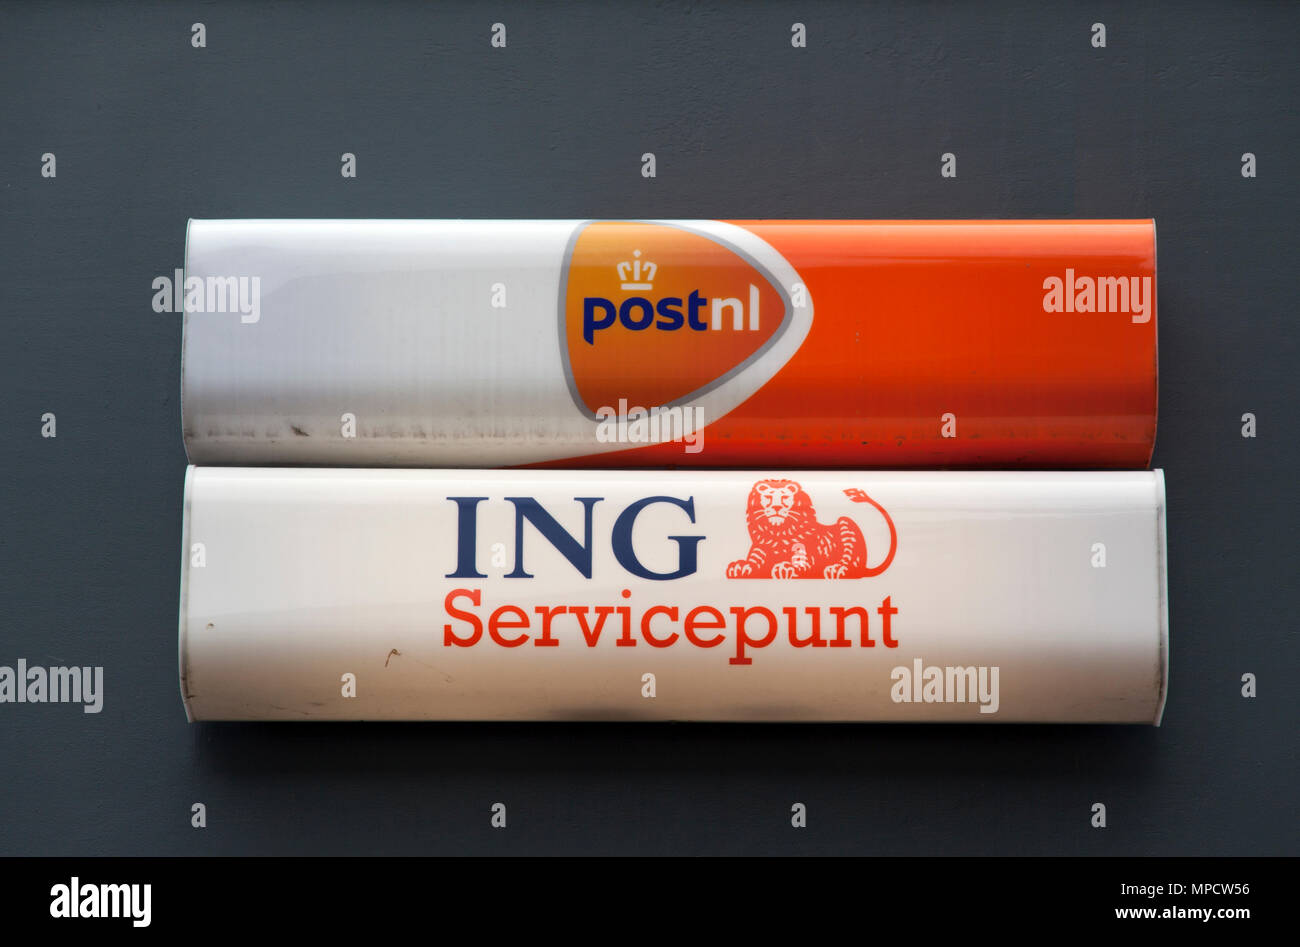 Mam Knorretje Oppositie Amsterdam,Netherlands-july 27, 2015: Ing service point and postnl shop in  Amsterdam Stock Photo - Alamy